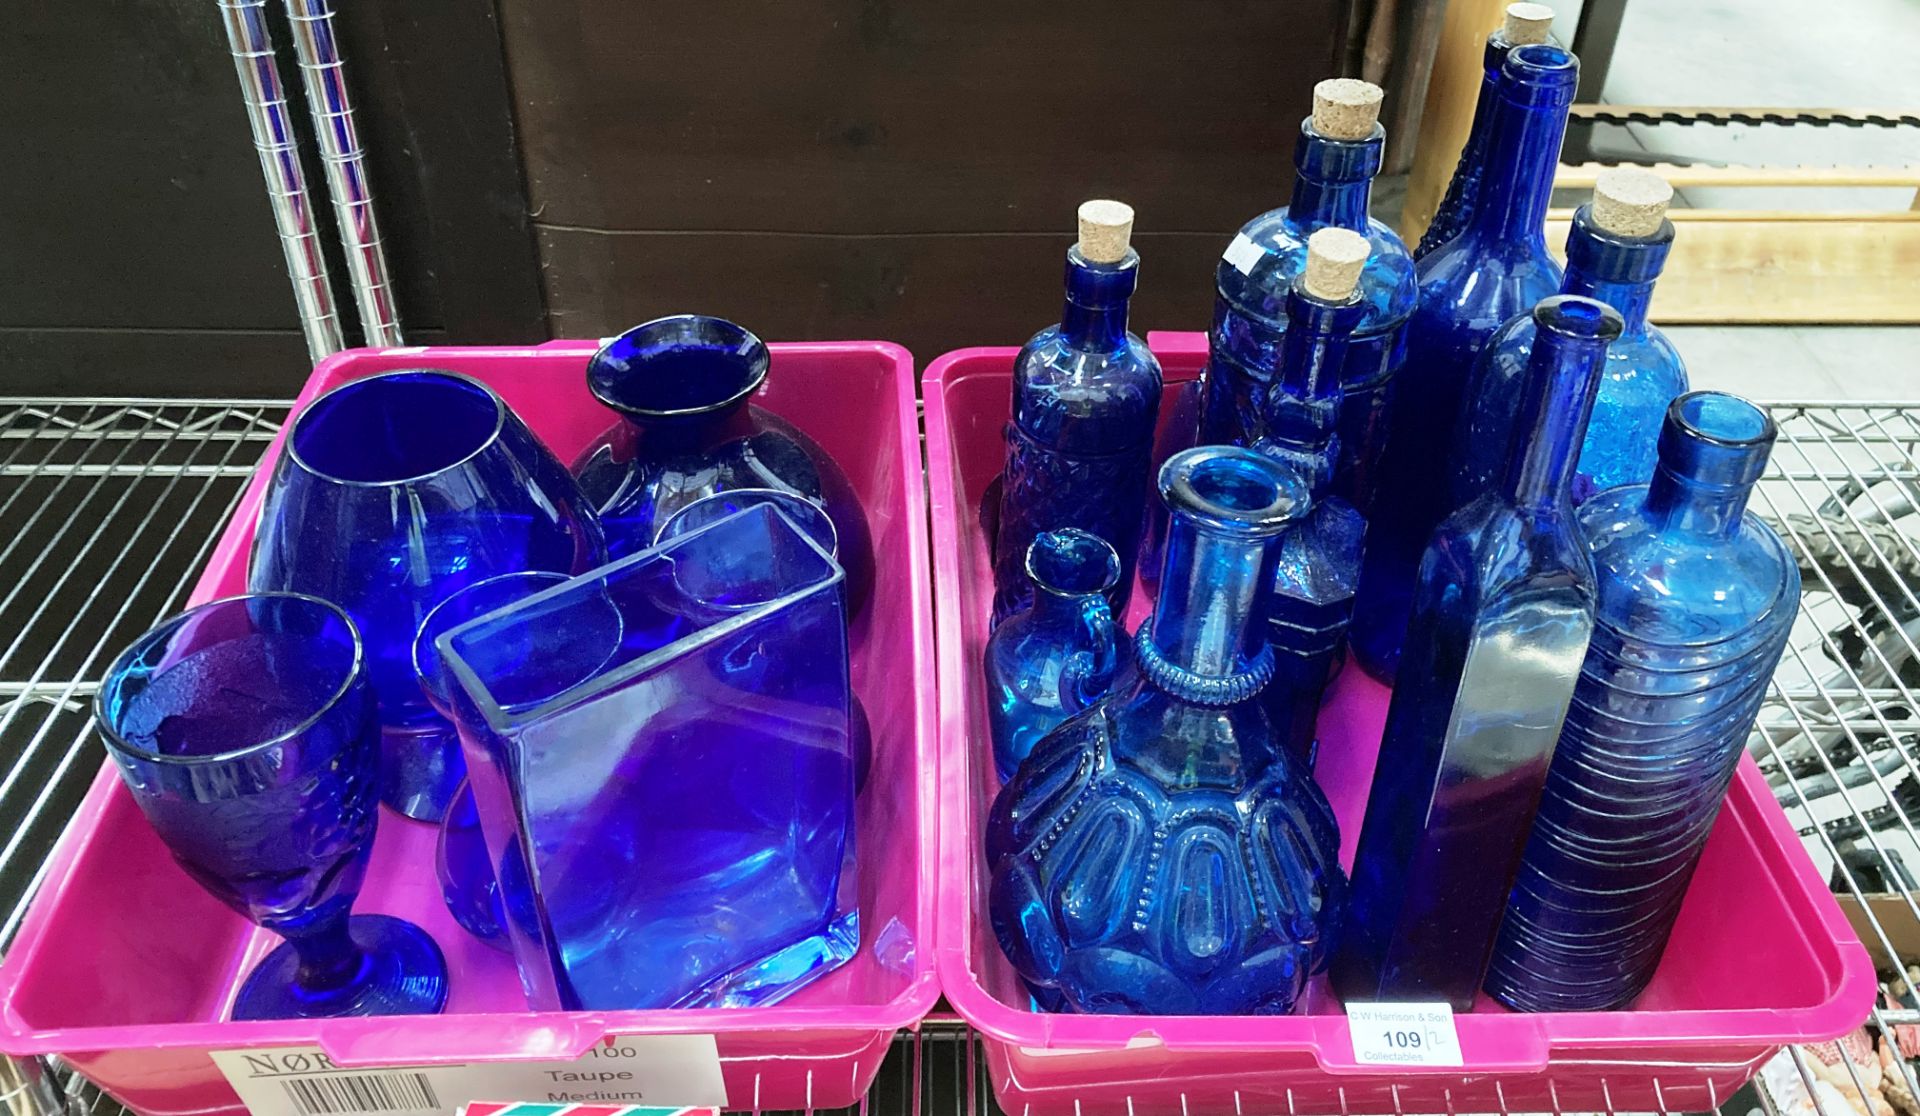 Contents to two purple plastic trays - a selection of blue glass bottles and vases